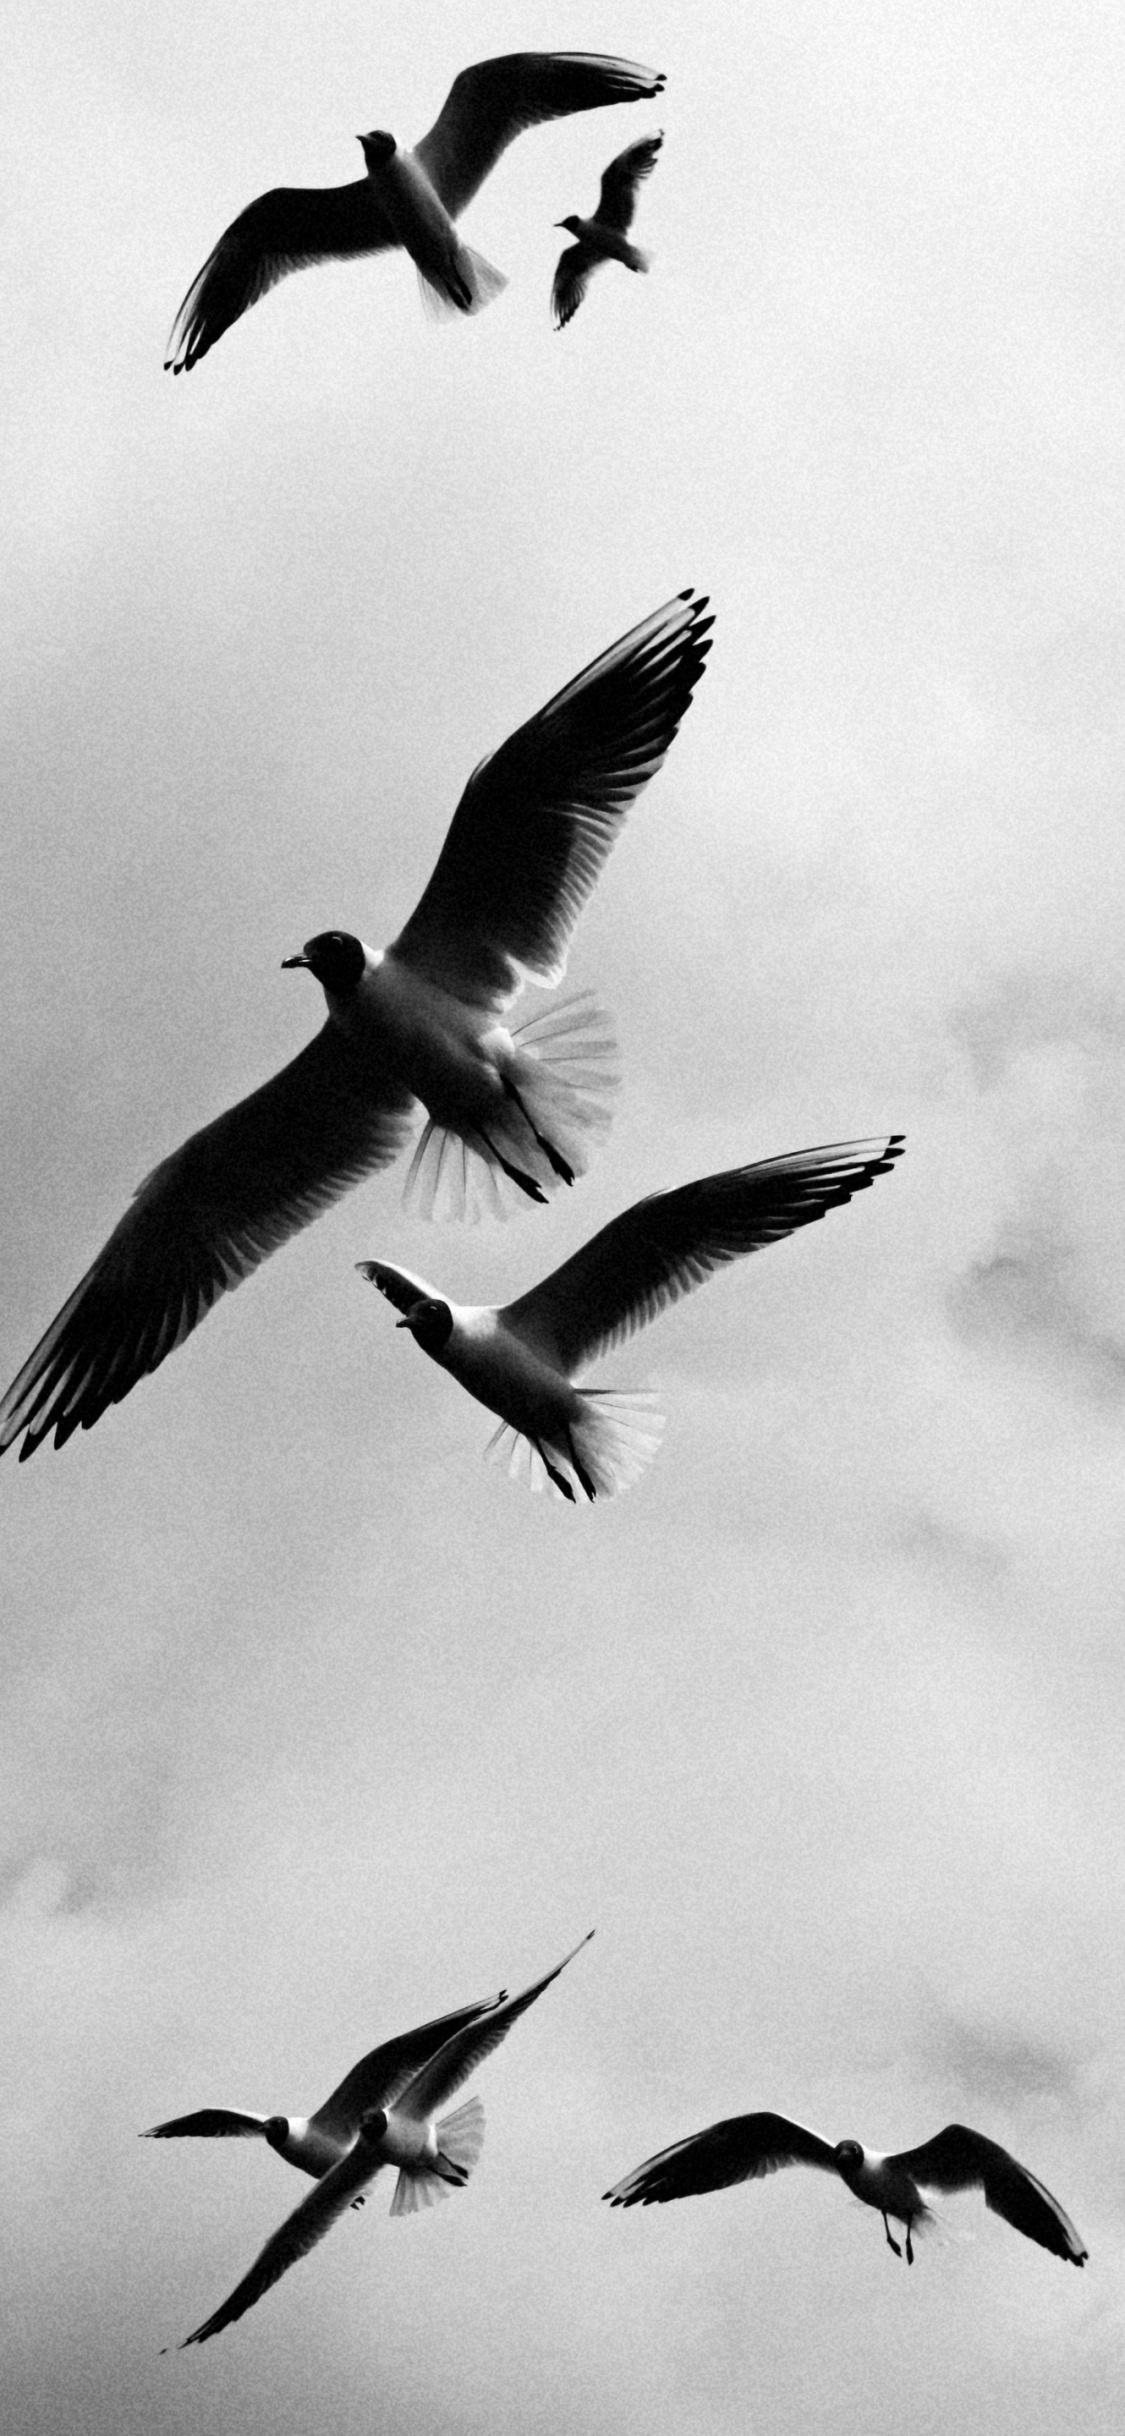 Grayscale Photography of Birds Flying. Wallpaper in 1125x2436 Resolution